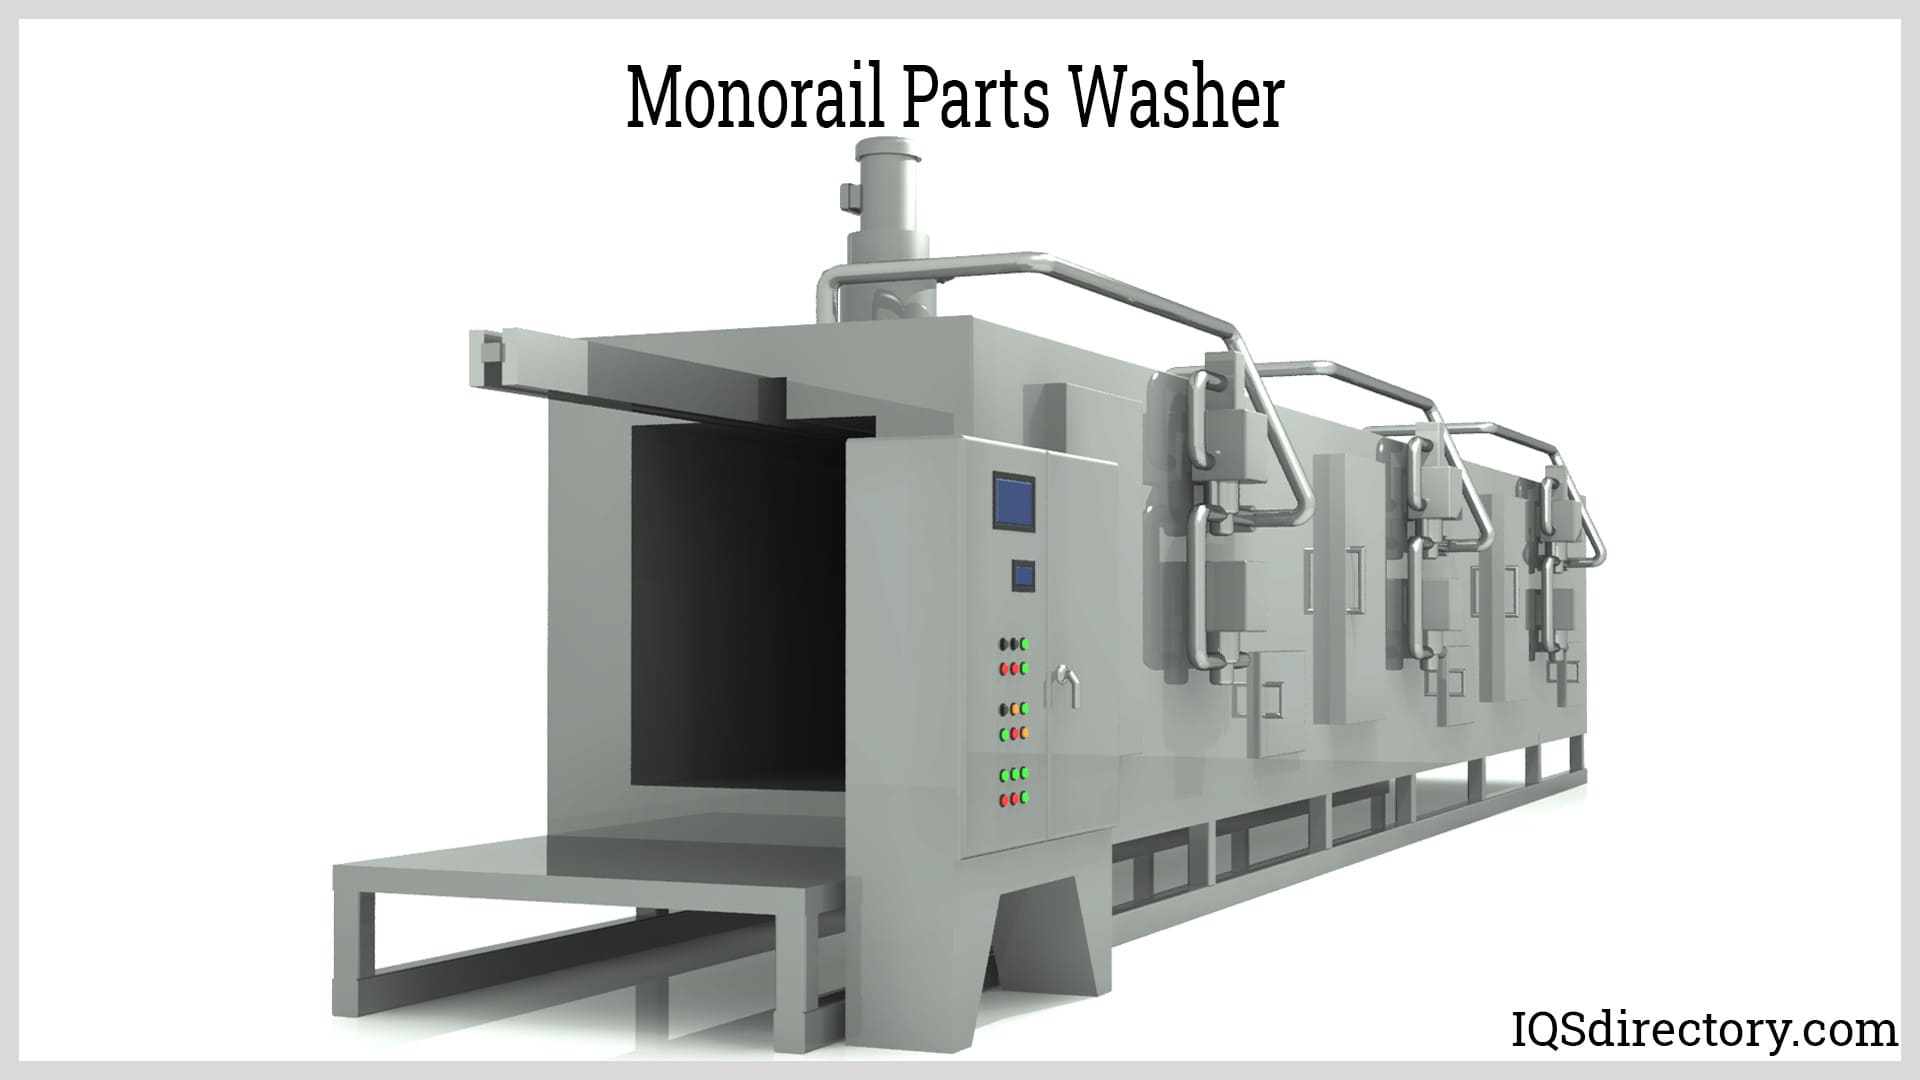 Monorail Parts Washer